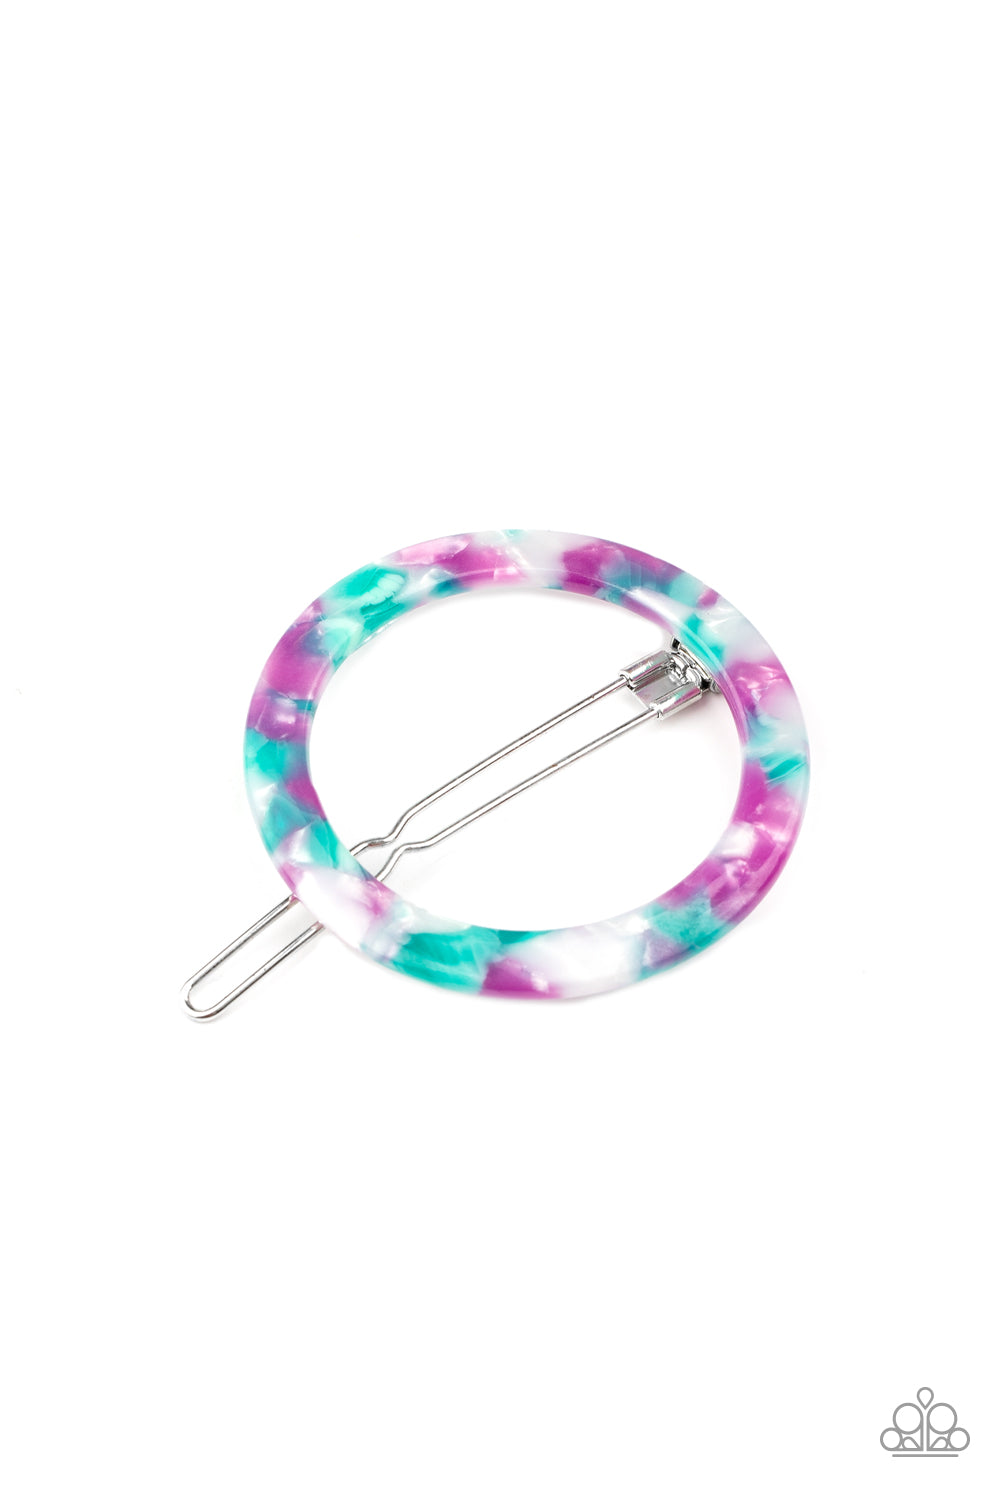 In The Round - Multi Hair Accessory Paparazzi Accessories